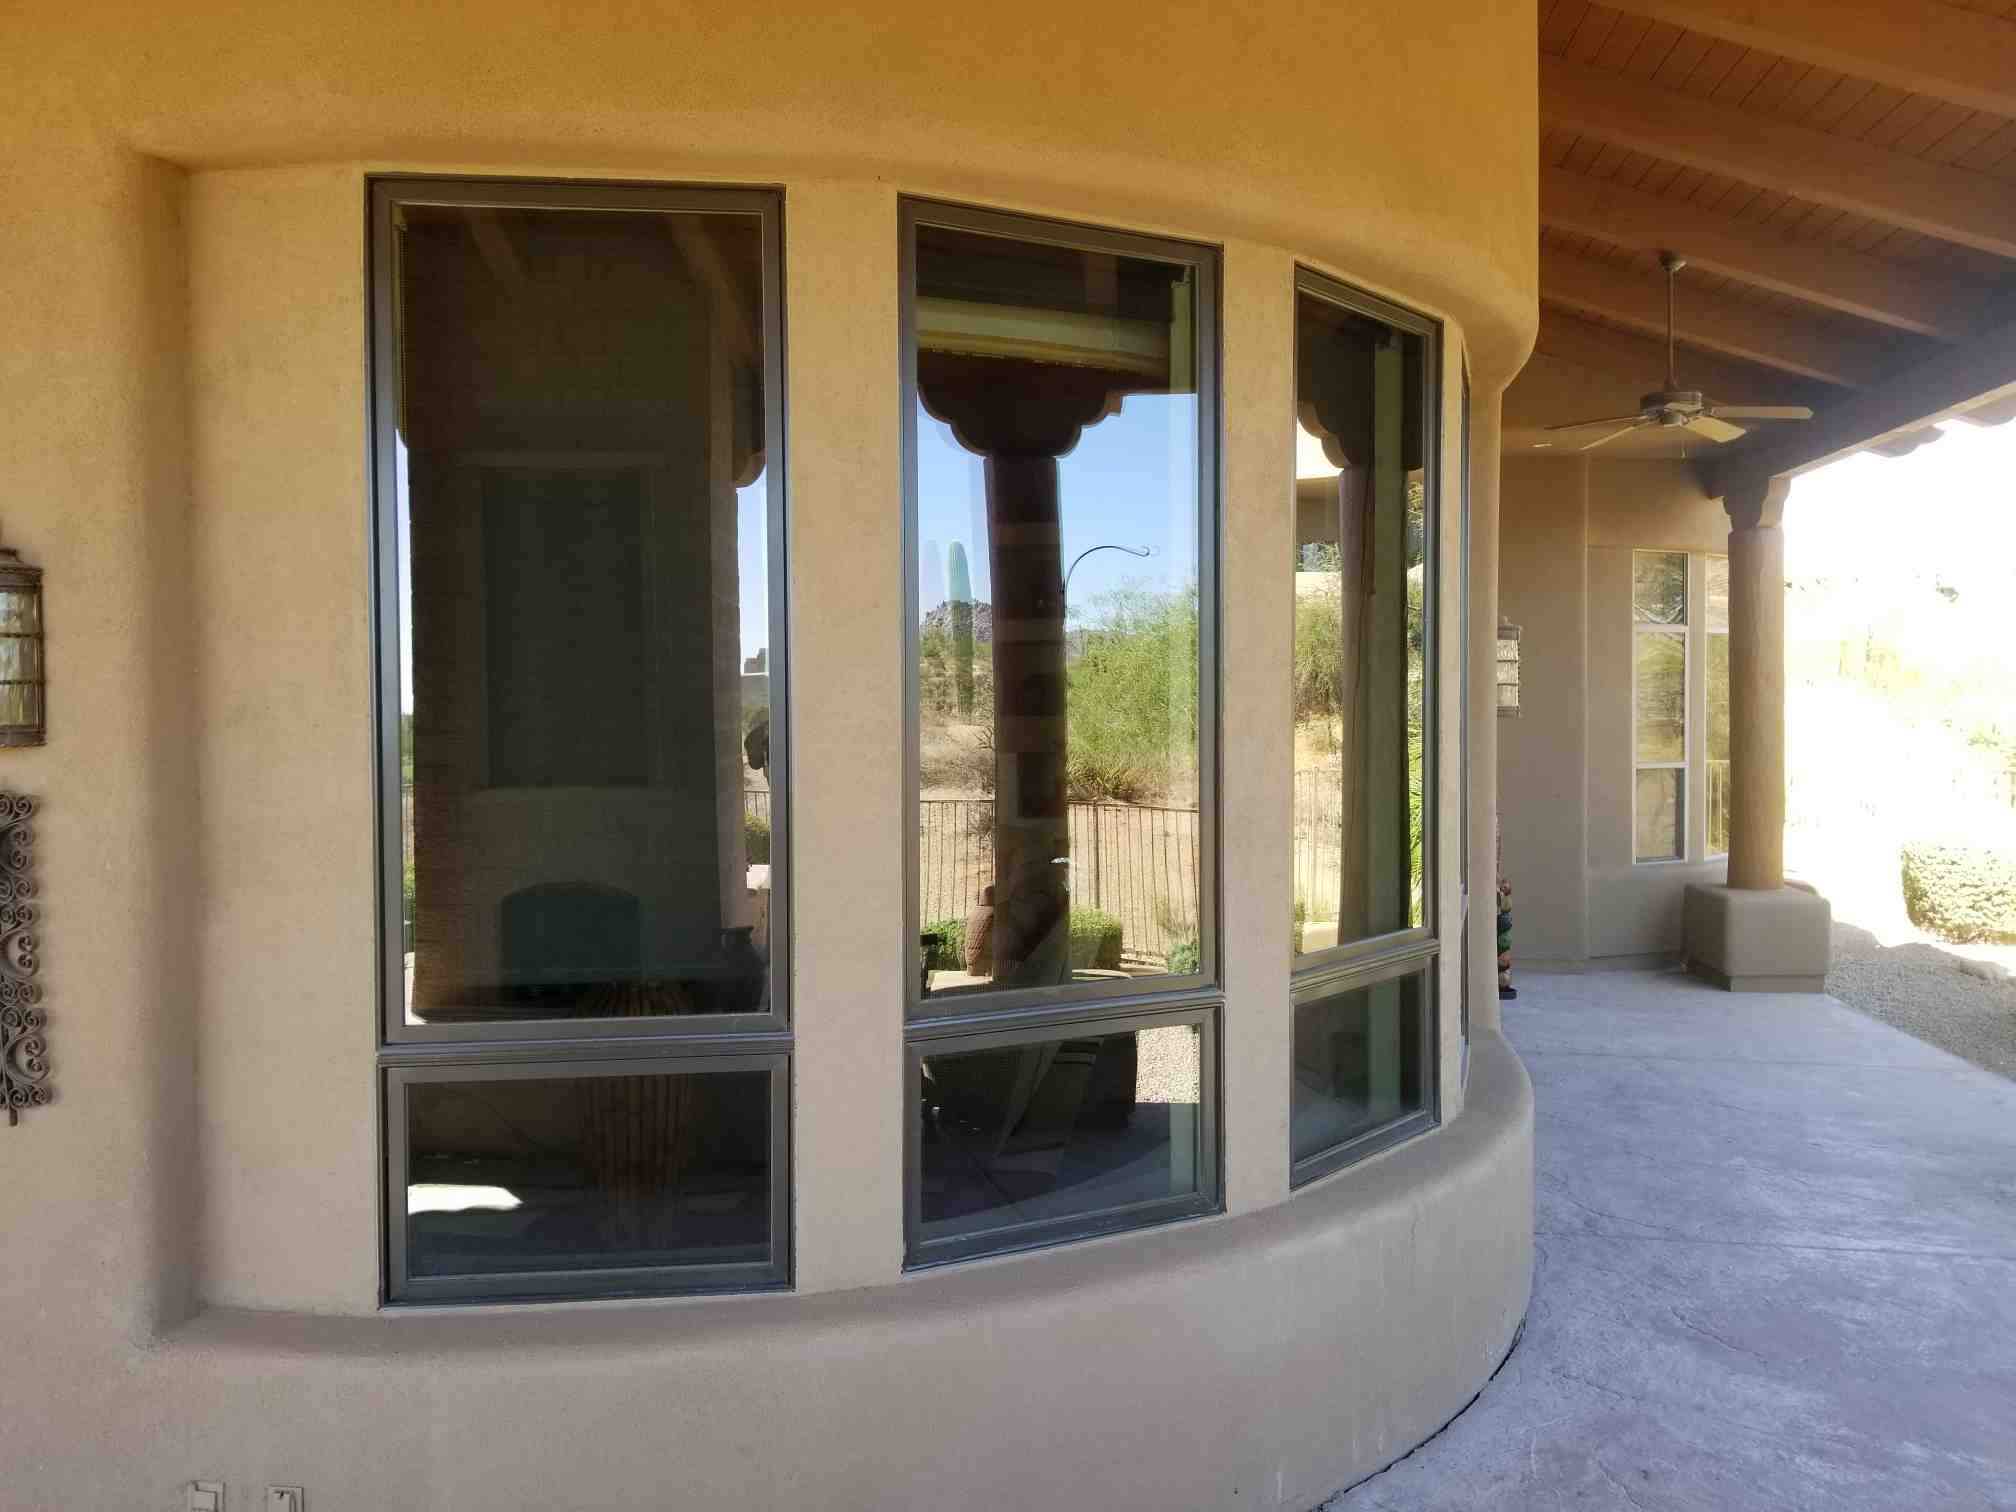 Arizona Window and Door in Scottsdale and Tucson showing wood windows on curve of house